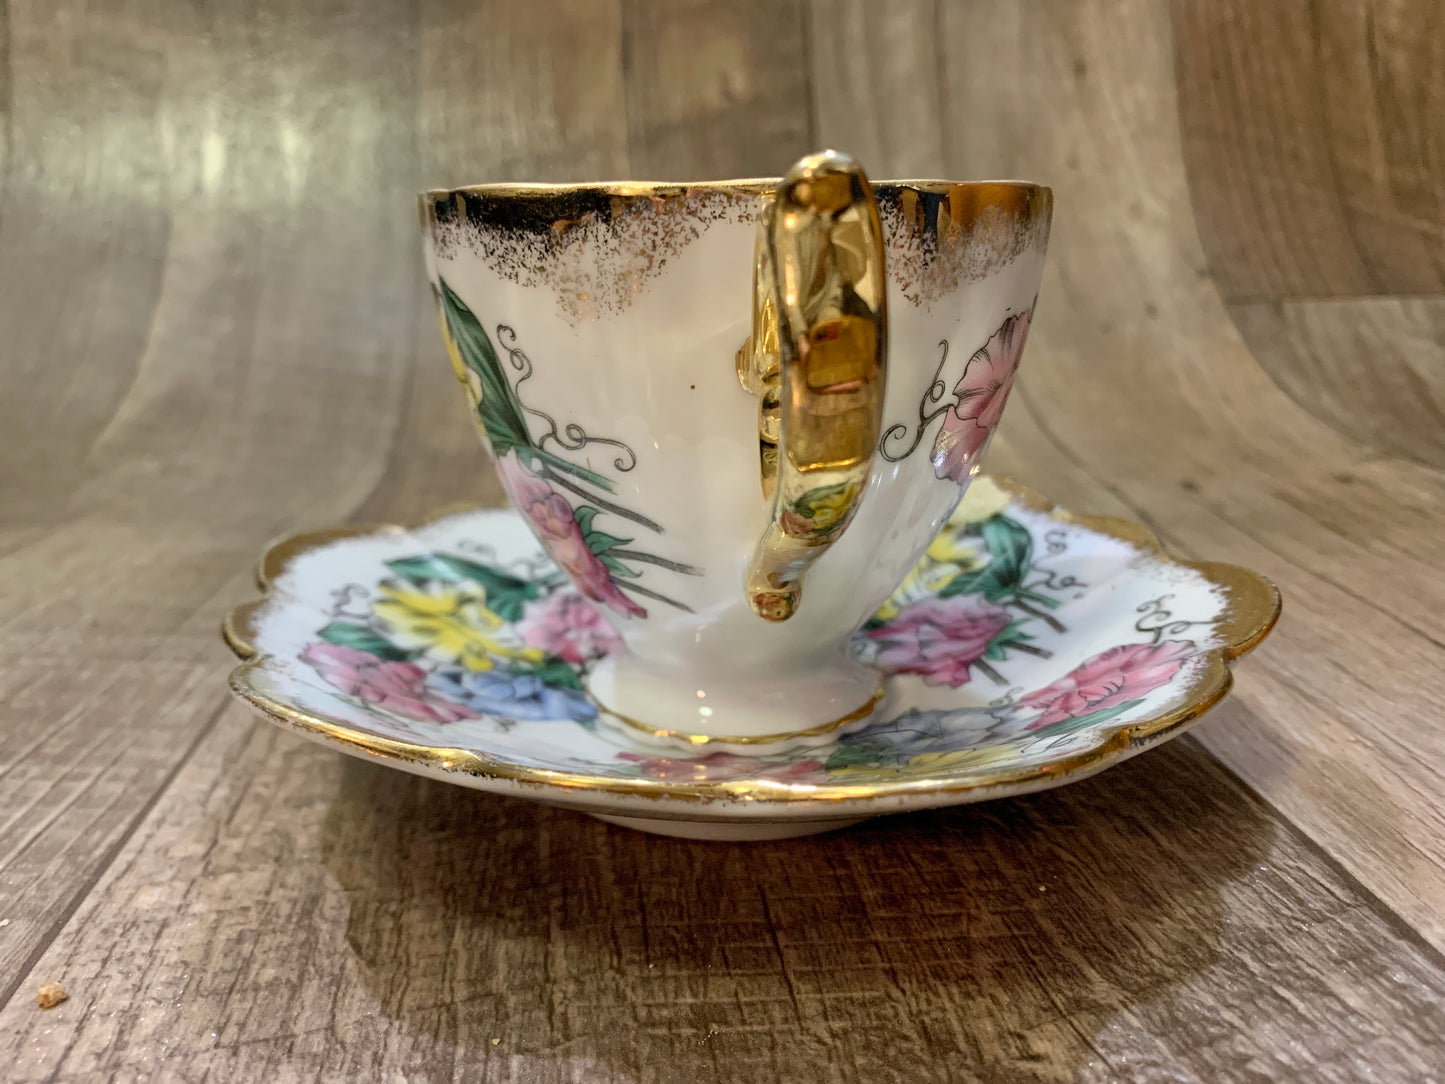 Pink, Blue, and Yellow Shafford Tea Cup and Saucer Set Tea Lovers Gift Grand Millennial Style